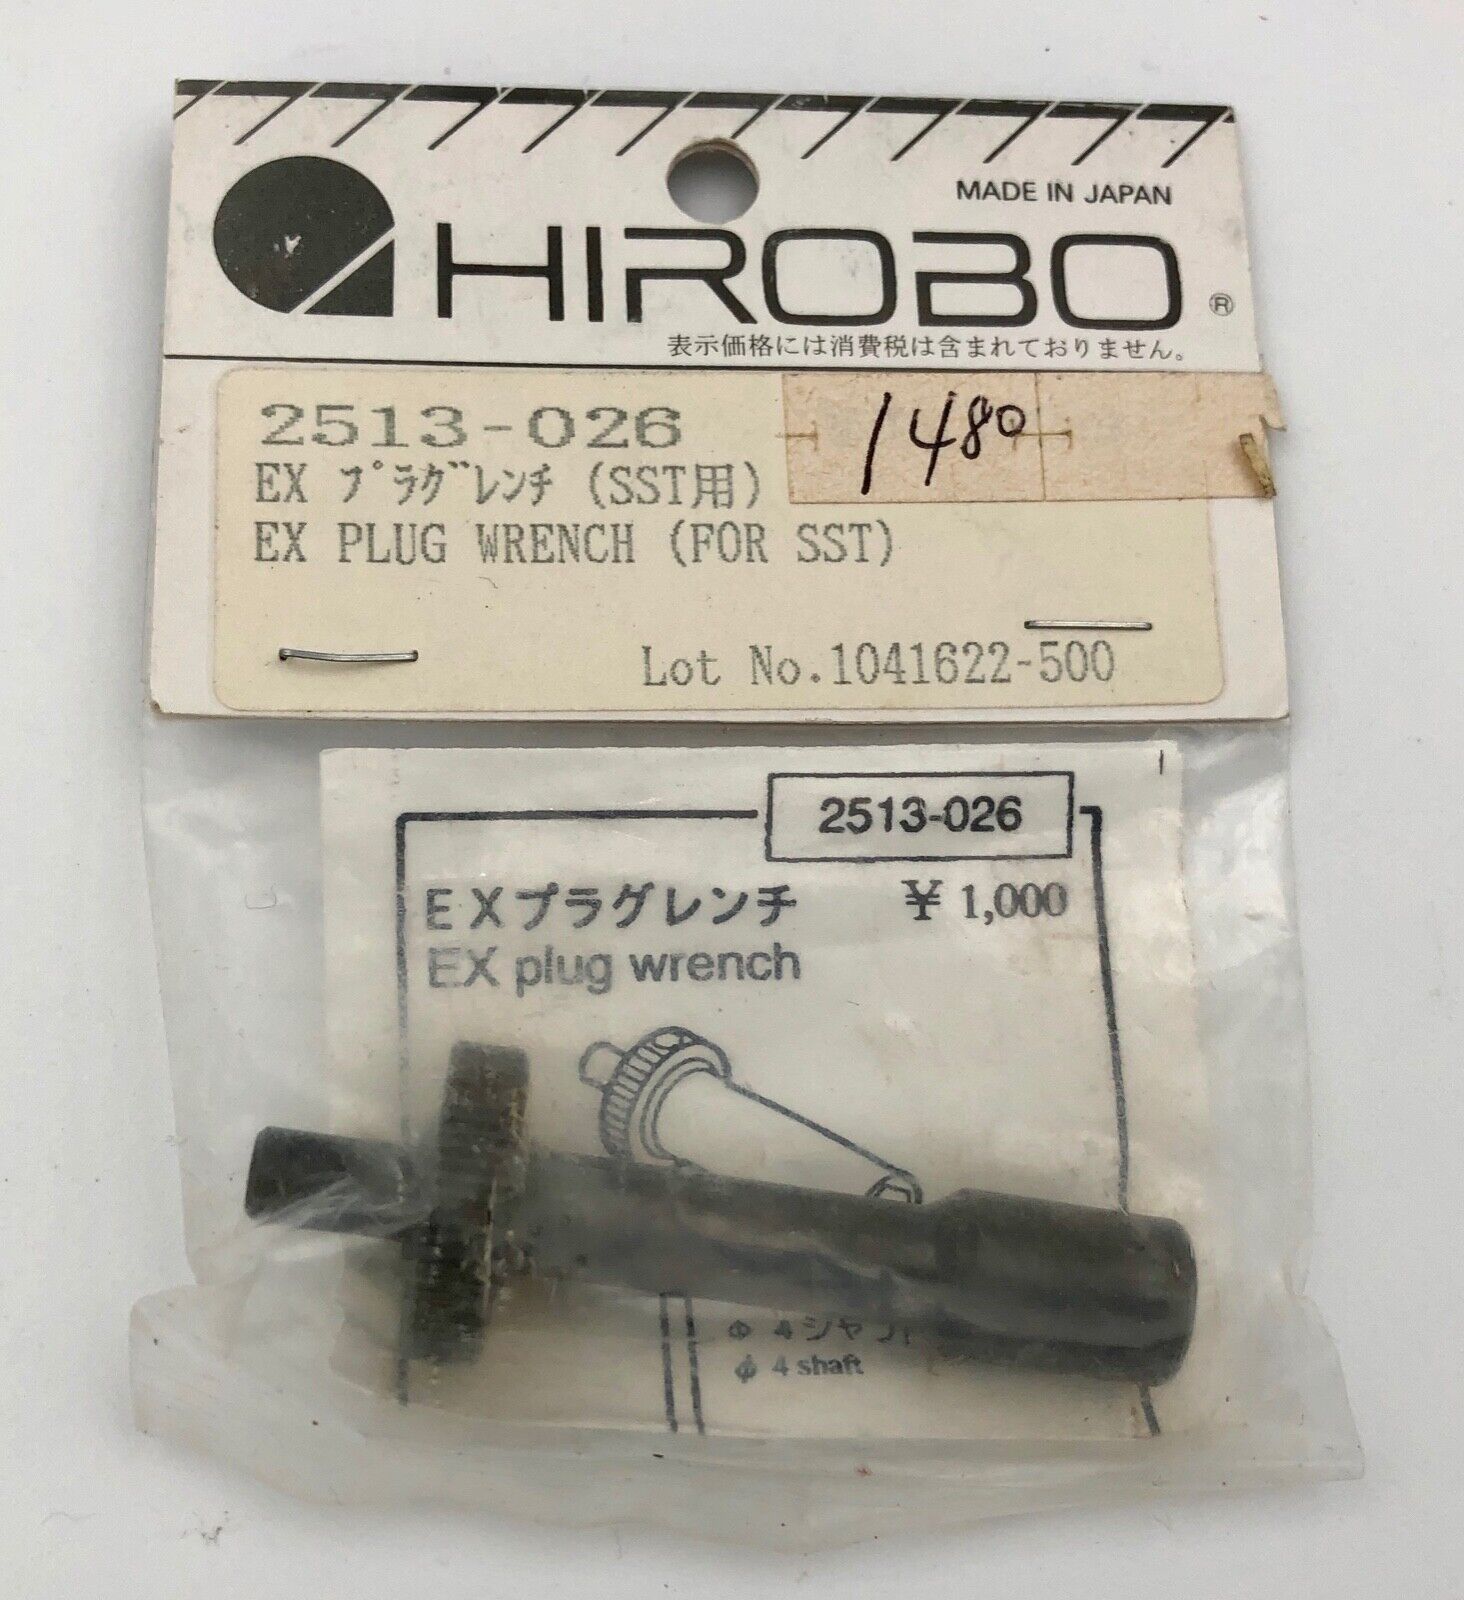 HIROBO 2513-026 EX PLUG WRENCH FOR SST